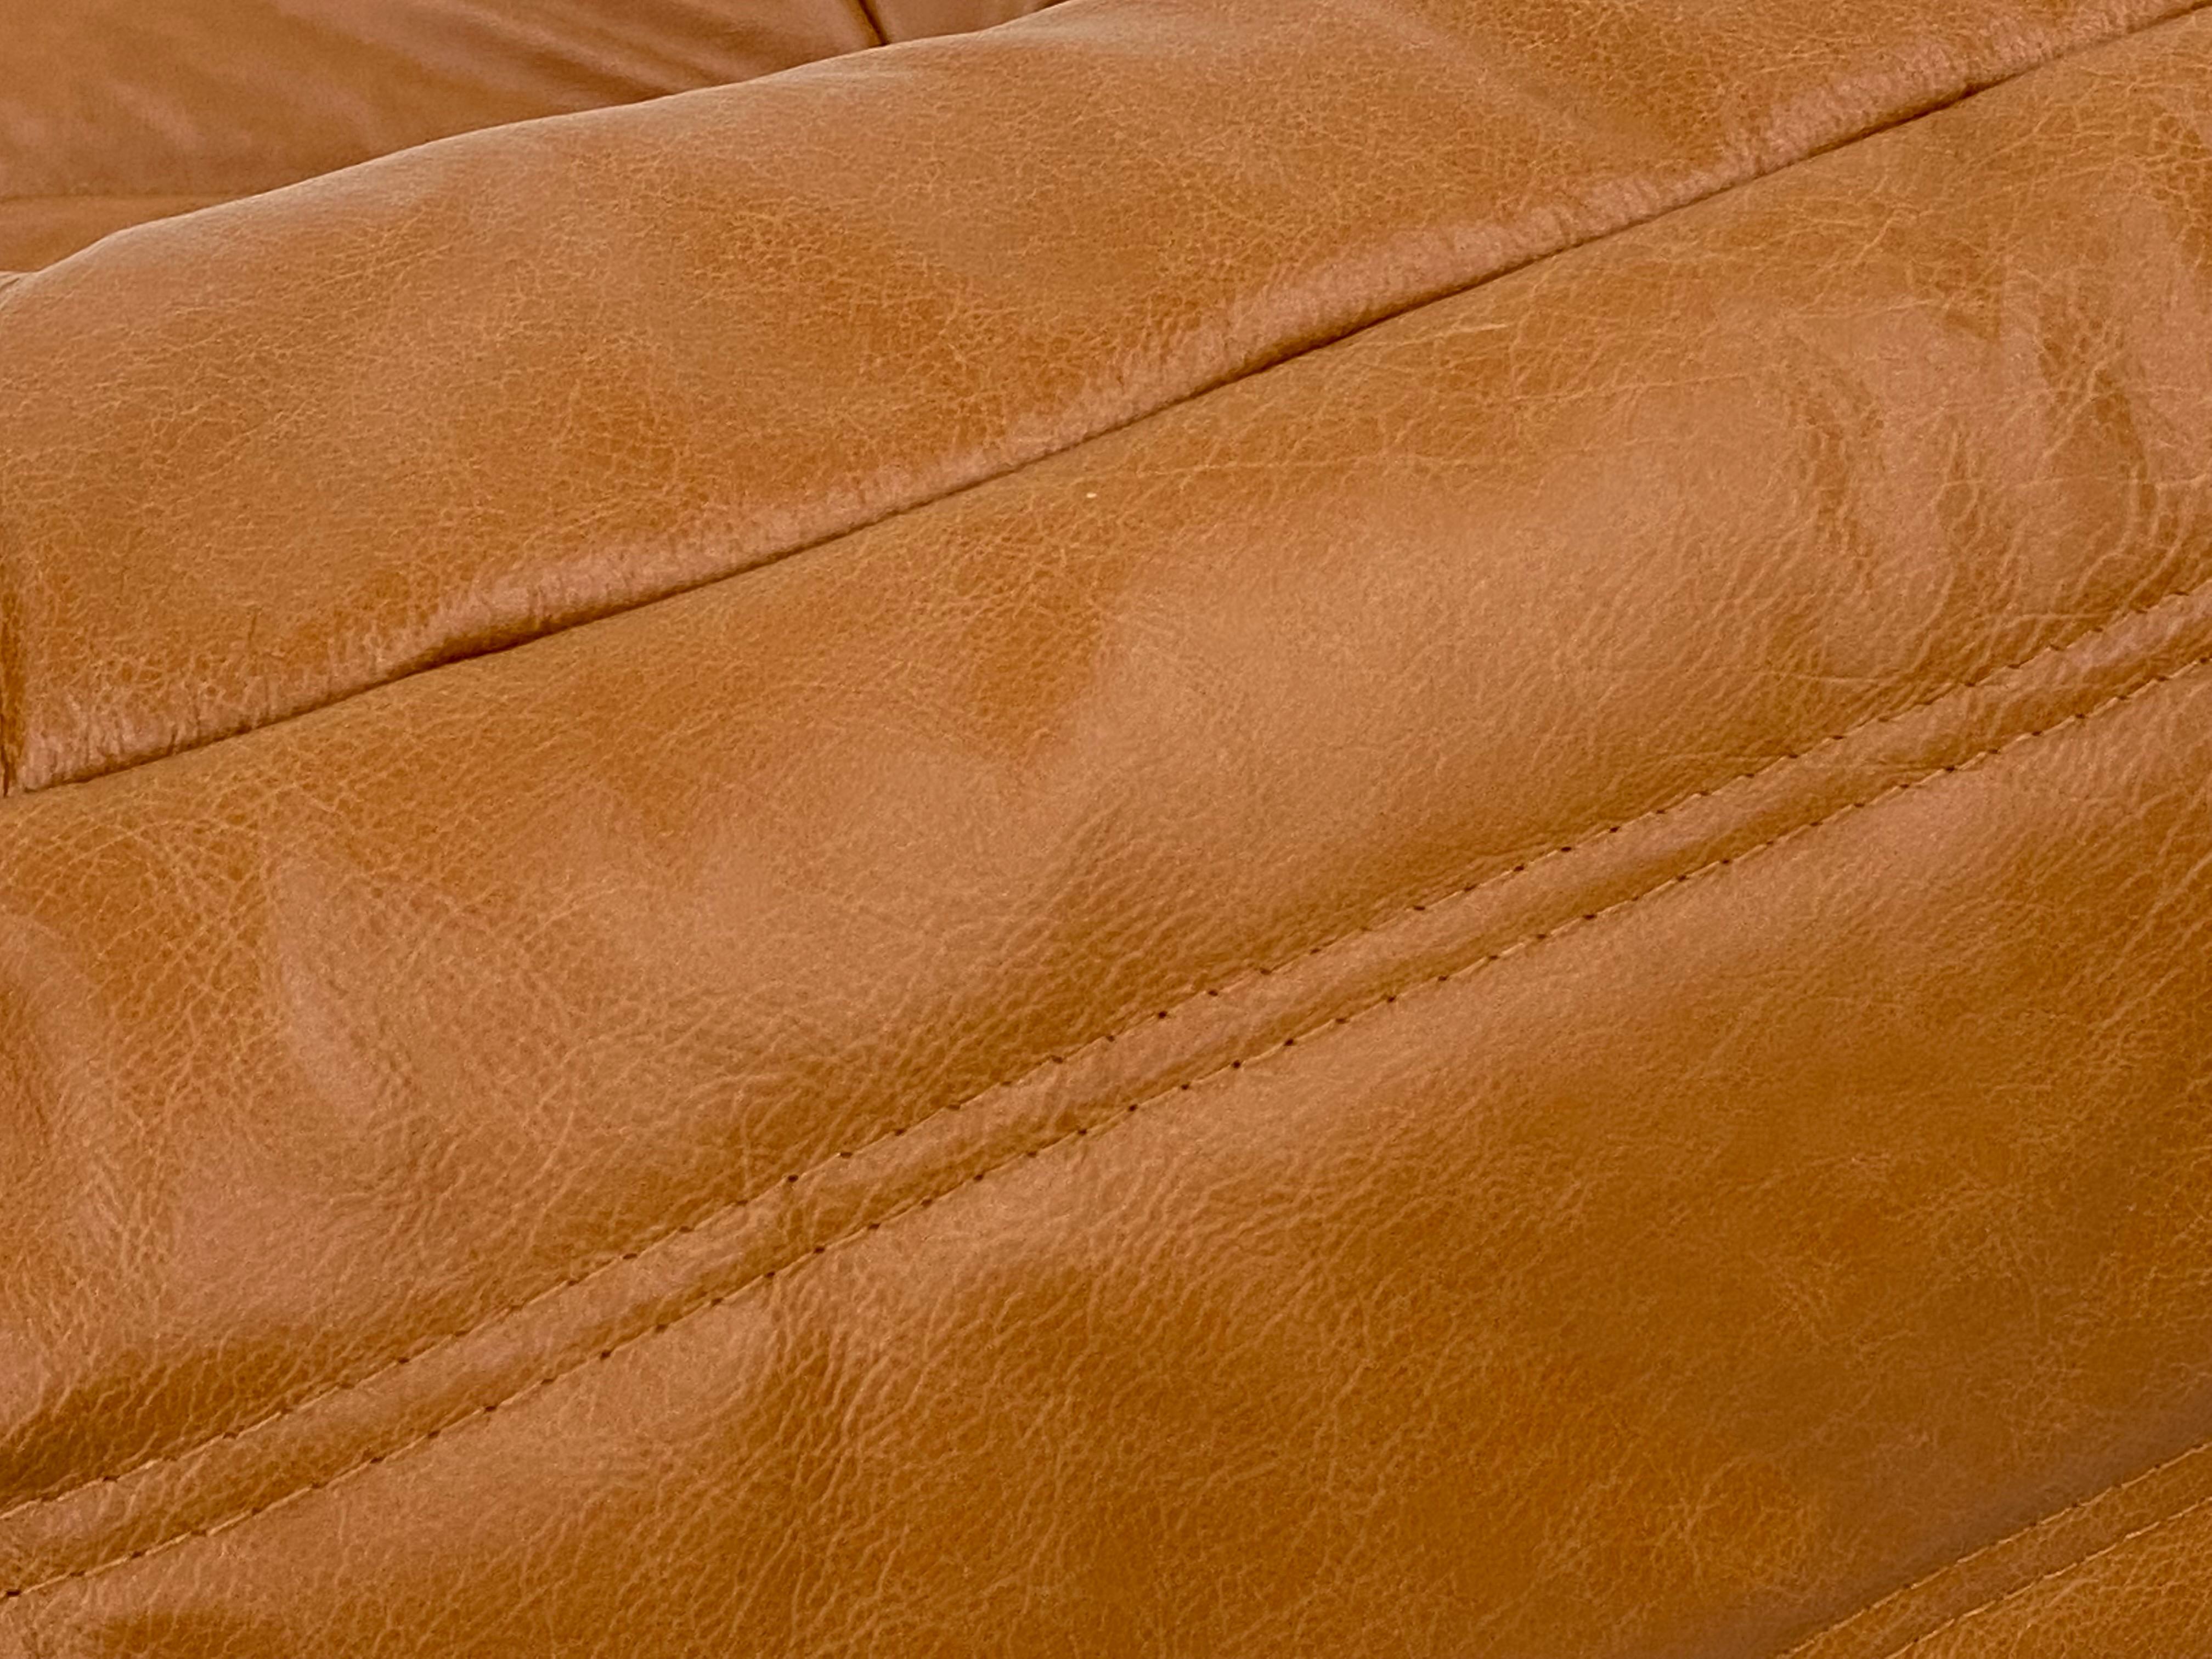 20th Century French Vintage Togo Sofa in Brown Leather by Michel Ducaroy for Ligne Roset.